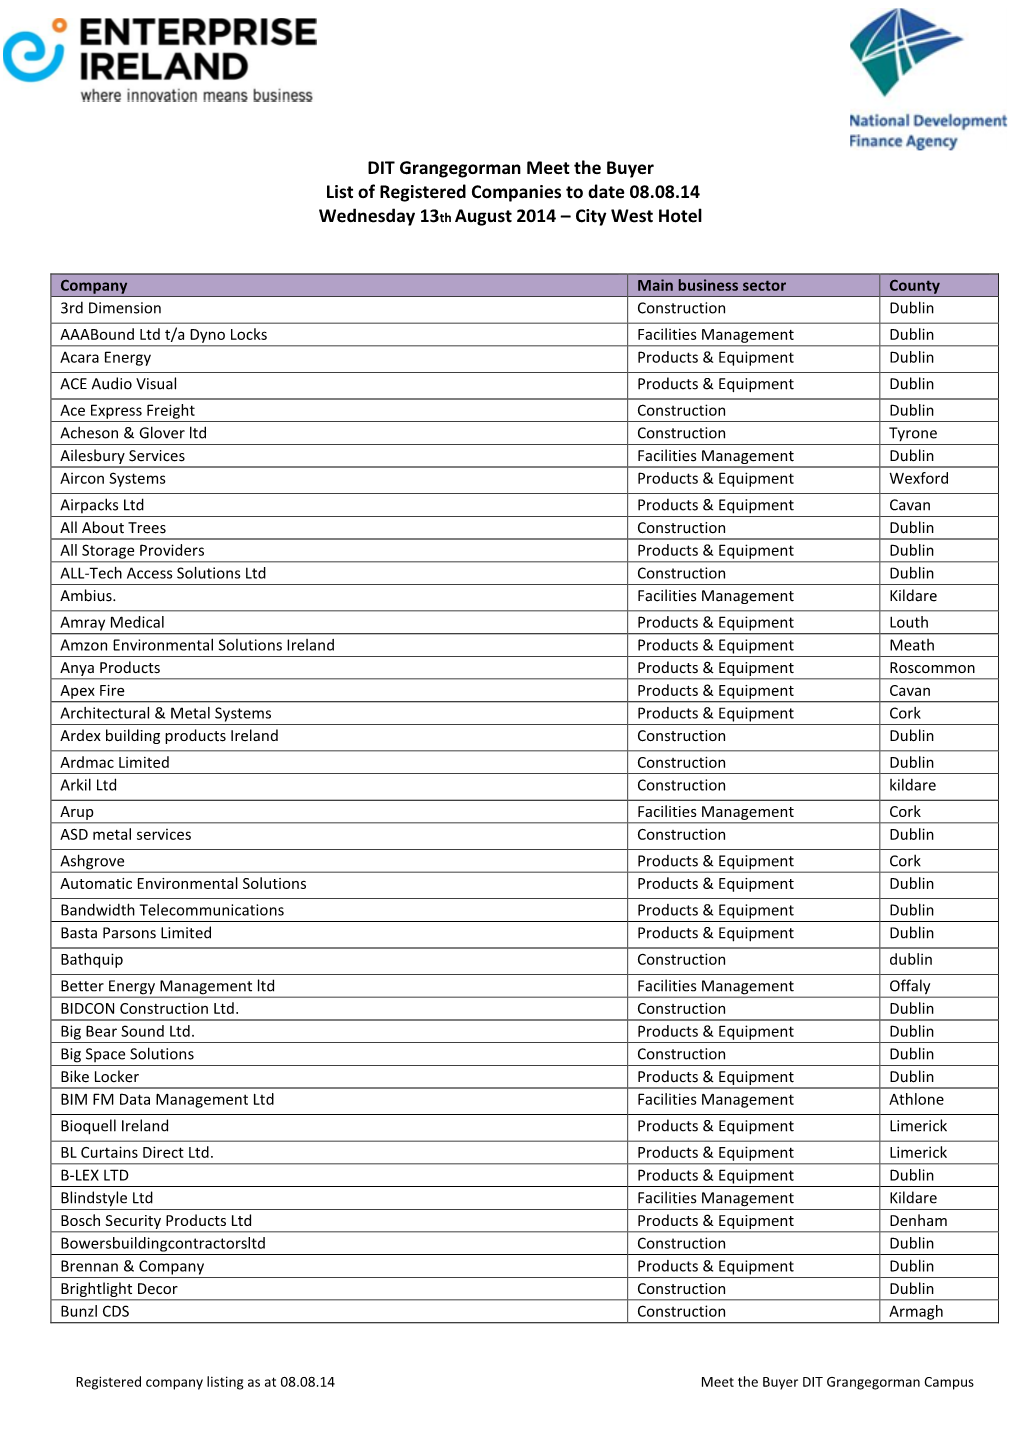 DIT Grangegorman Meet the Buyer List of Registered Companies to Date 08.08.14 Wednesday 13Th August 2014 – City West Hotel